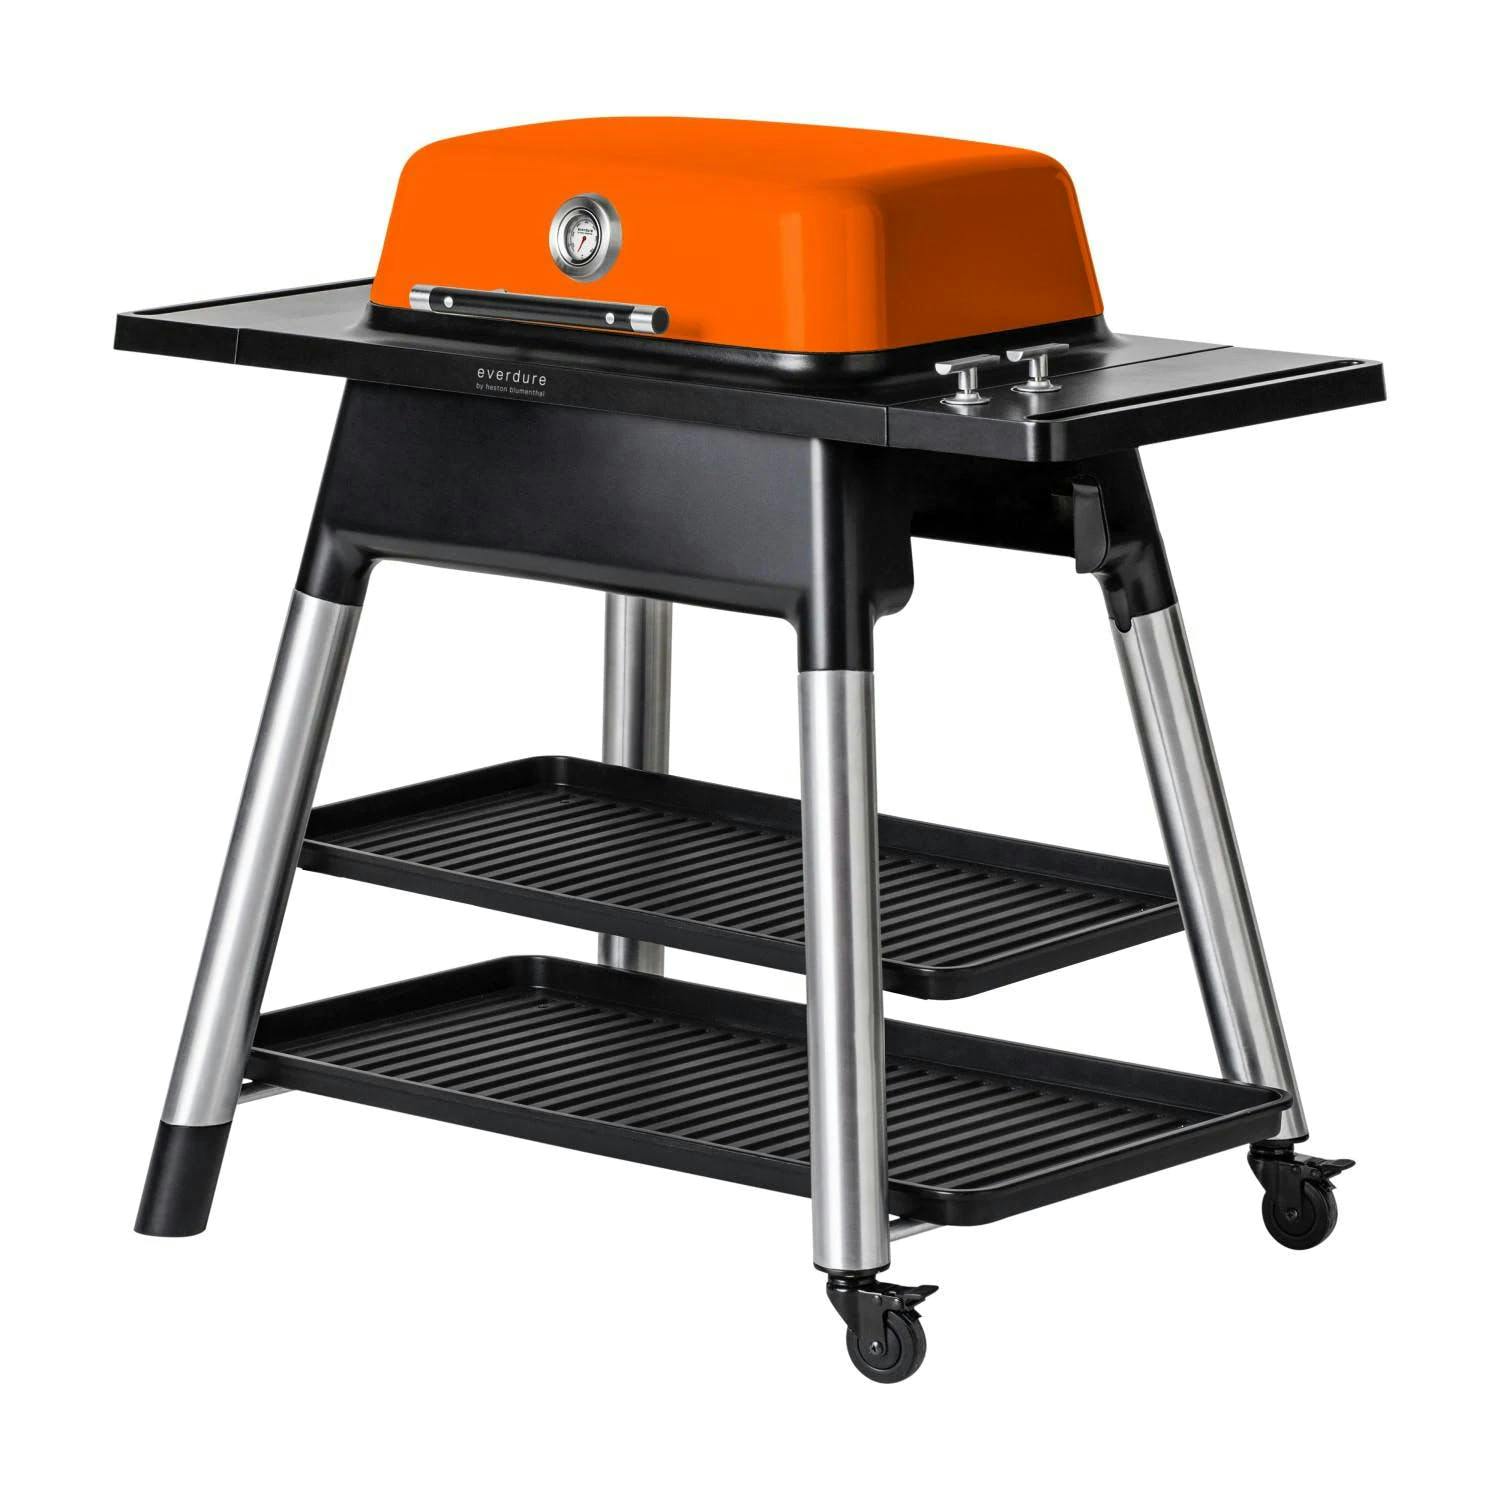 Everdure By Heston Blumenthal Gas Grill